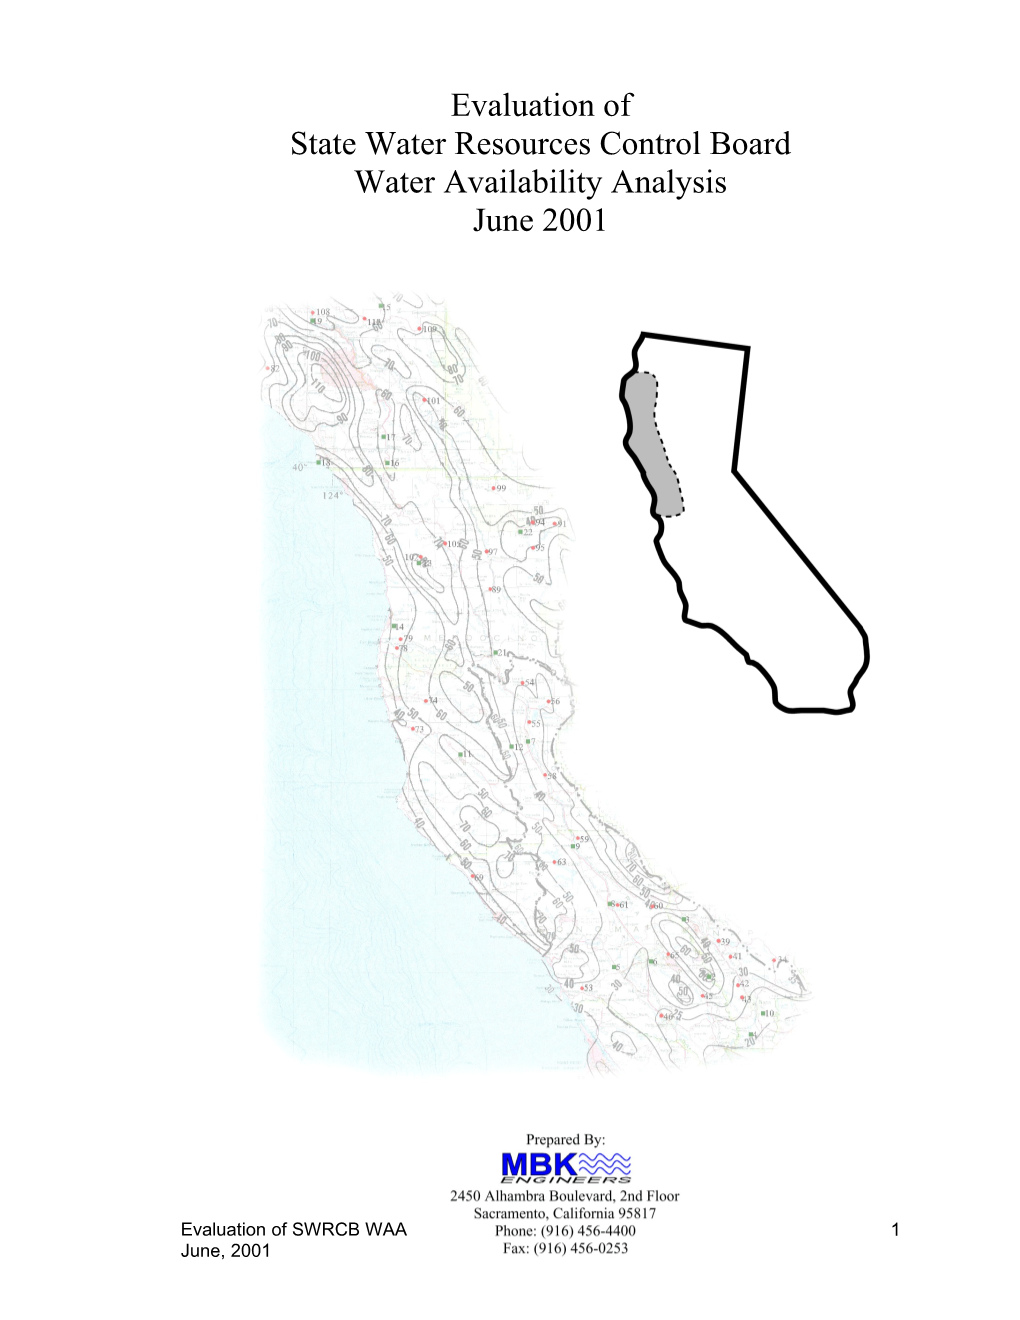 Evaluation of SWRCB Water Availability Analysis